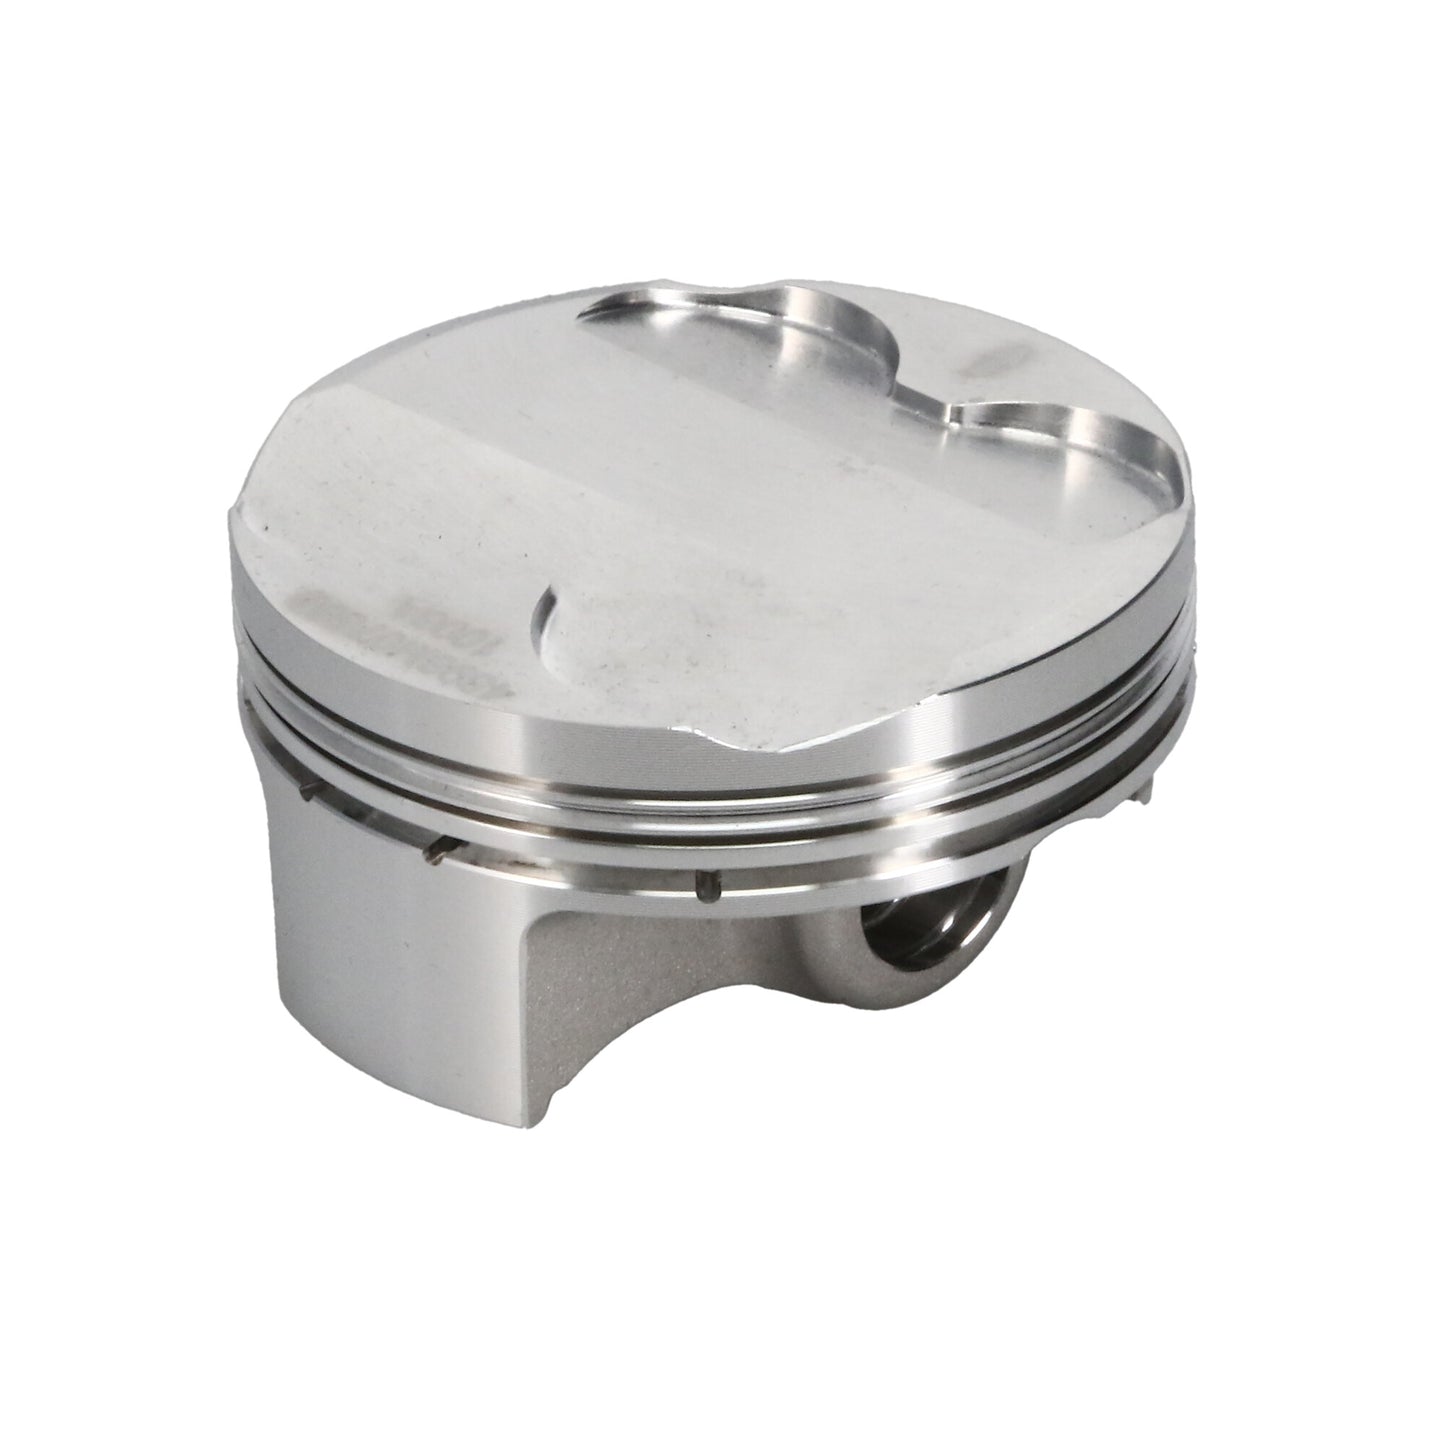 Wiseco 4 Stroke Forged Series Piston Kit 79.00 MM Bore 10.25:1 CR K1250